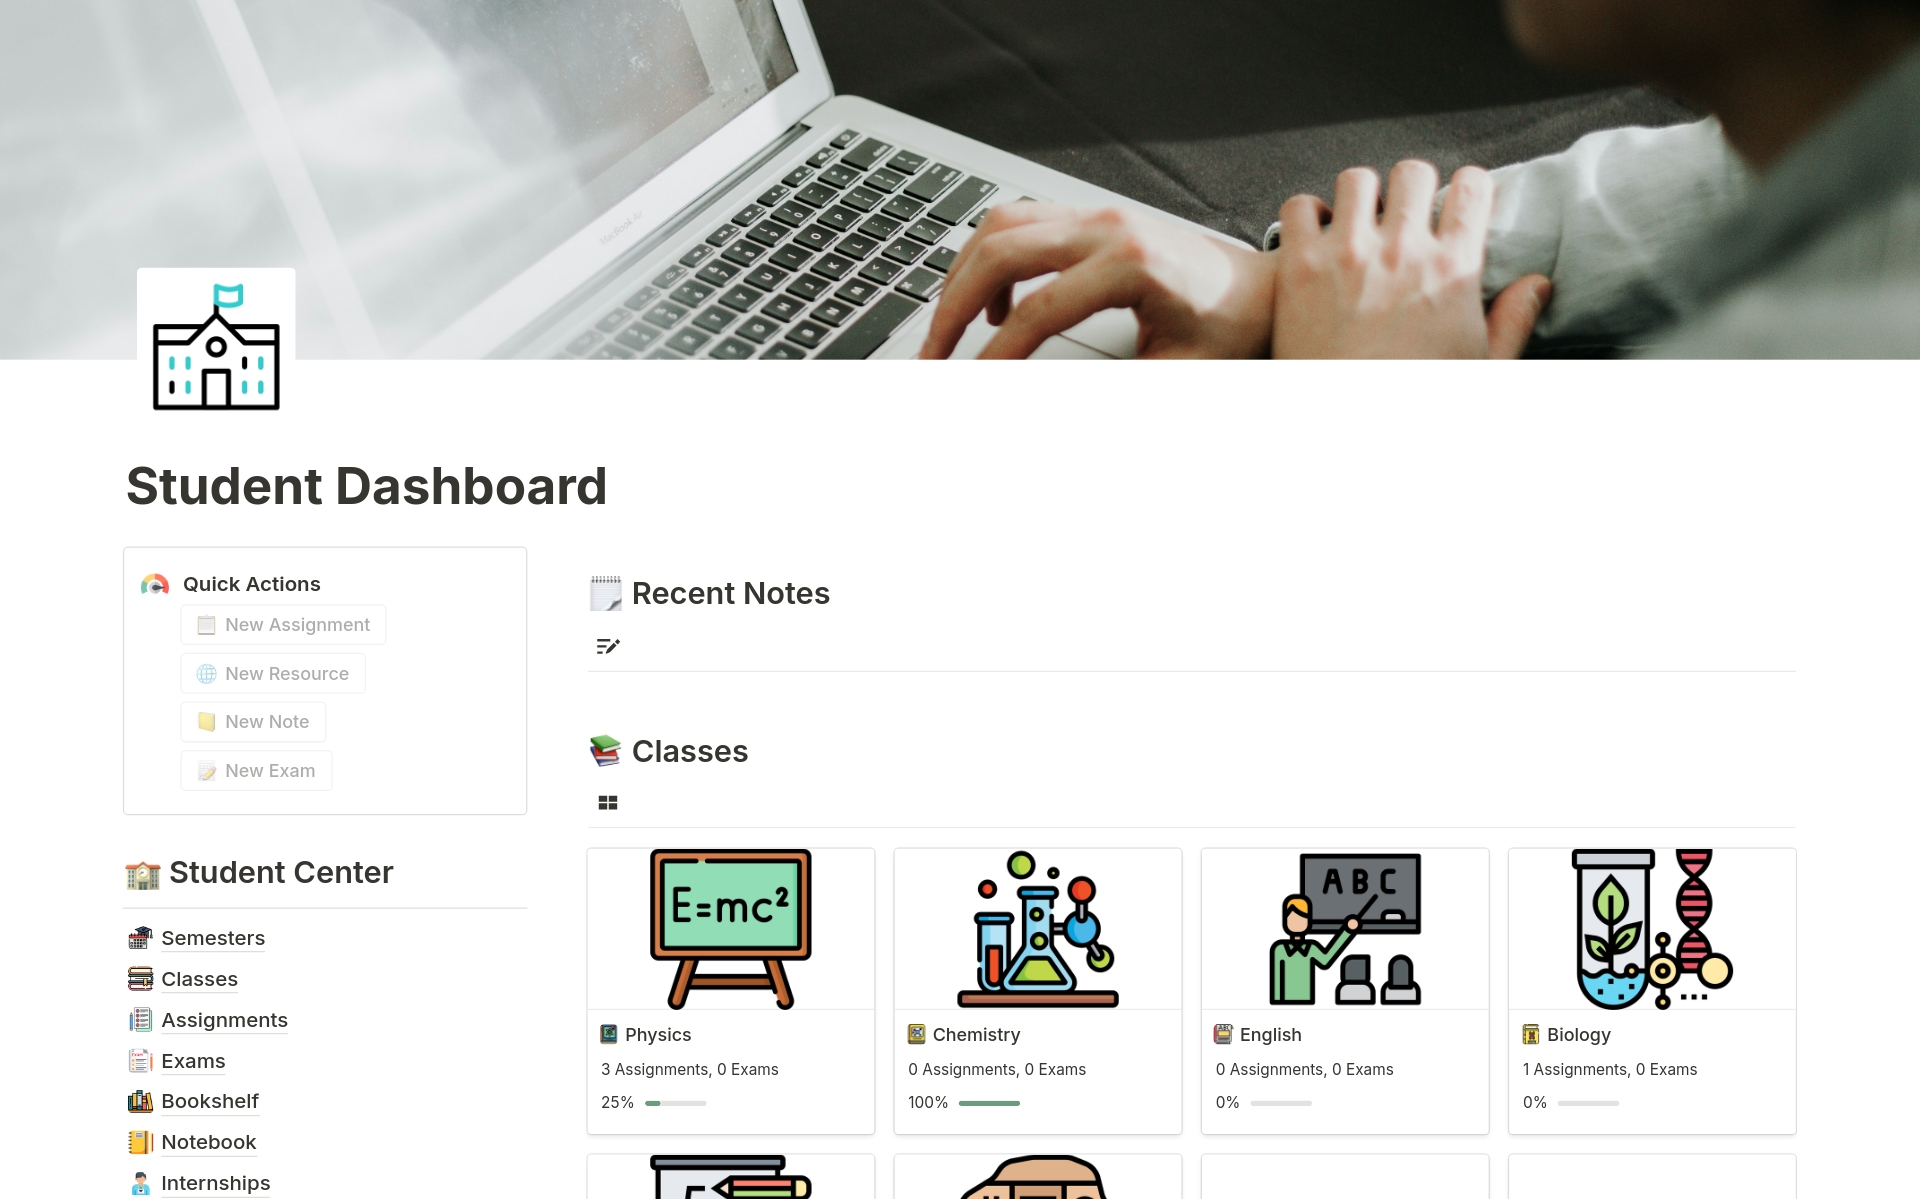 Stop juggling classes, assignments, exams, and notes. Now you can command your student life and achieve academic success easily. Introducing the Notion Student Dashboard - your personalized roadmap to academic triumph.